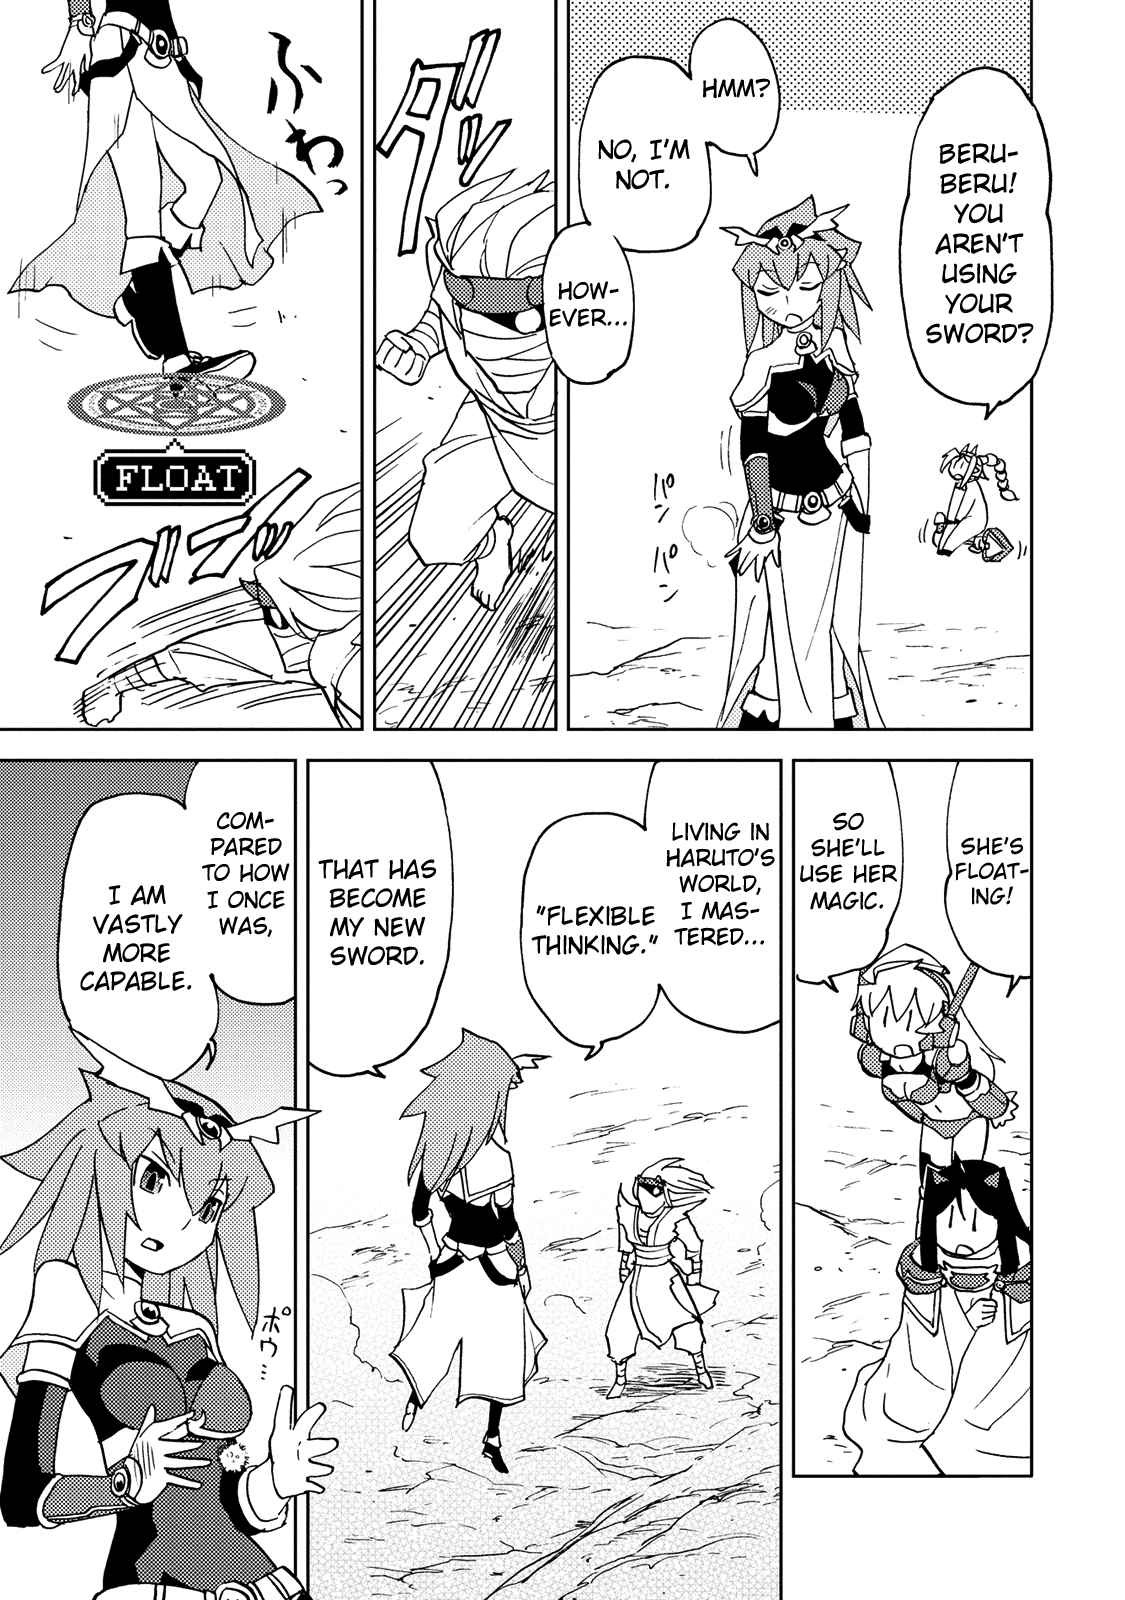 Choukadou Girl ⅙ Vol. 3 Ch. 31 A New Hero's Power Released